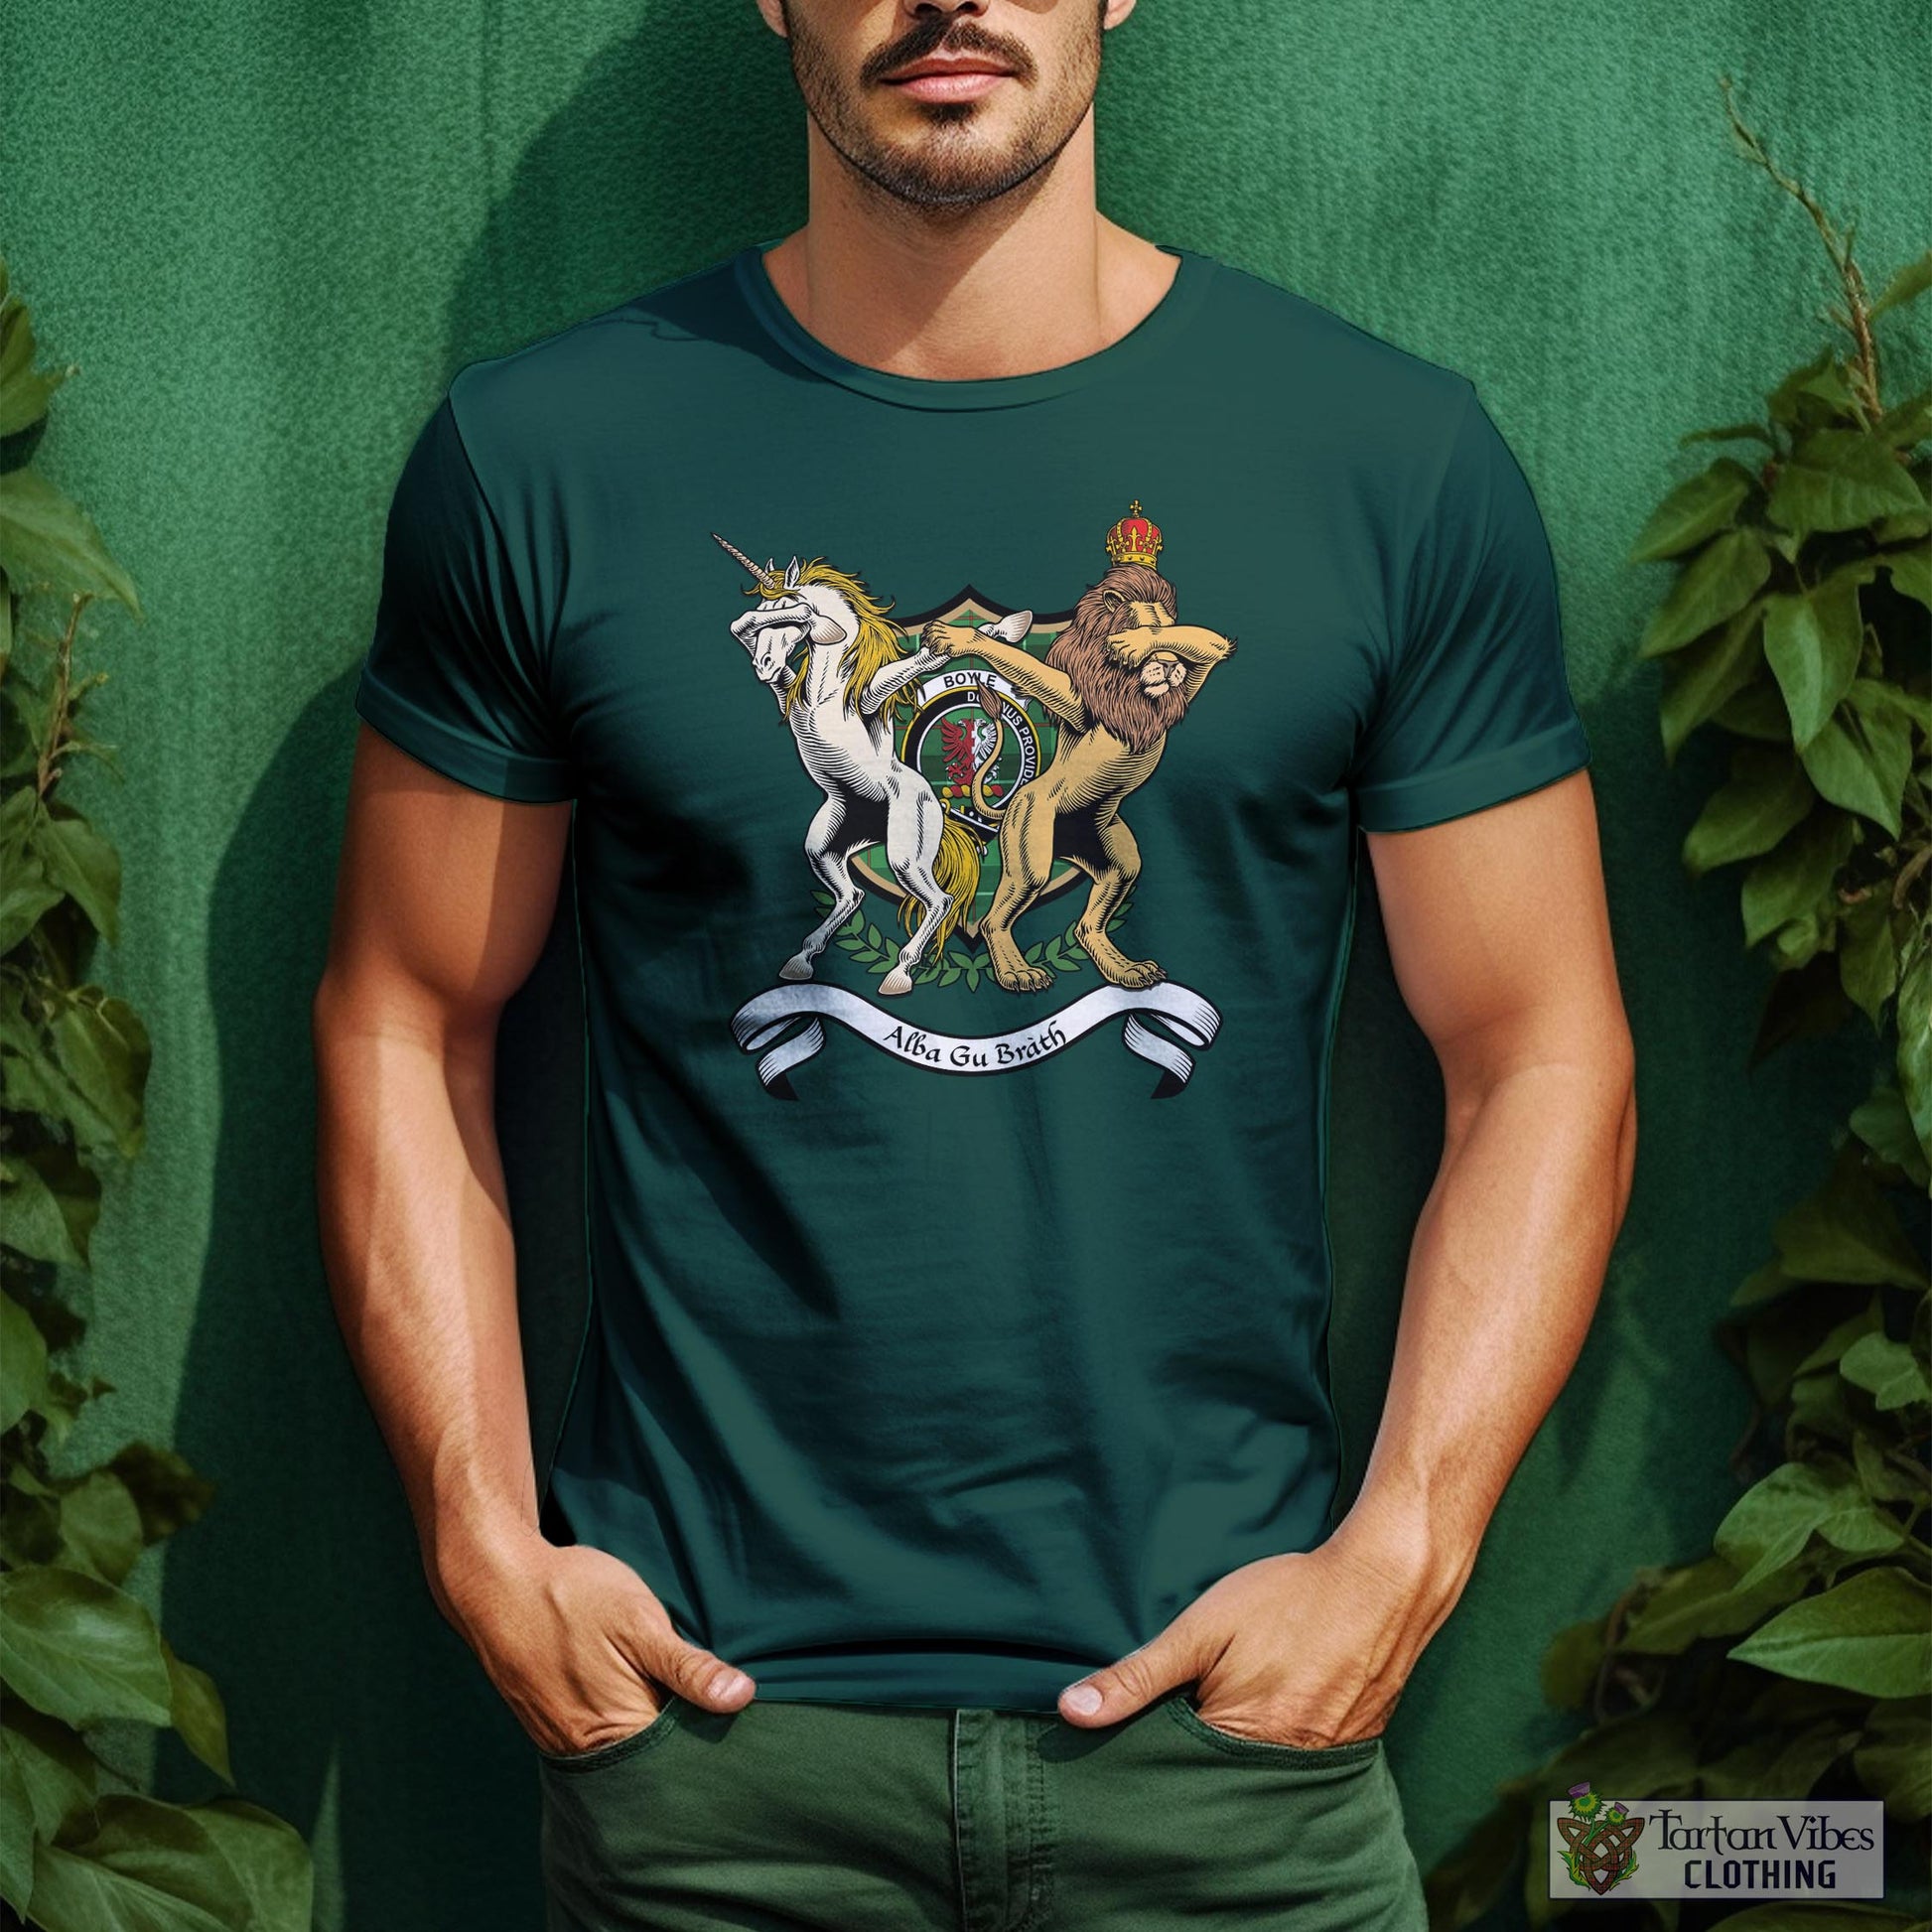 Tartan Vibes Clothing Boyle Family Crest Cotton Men's T-Shirt with Scotland Royal Coat Of Arm Funny Style